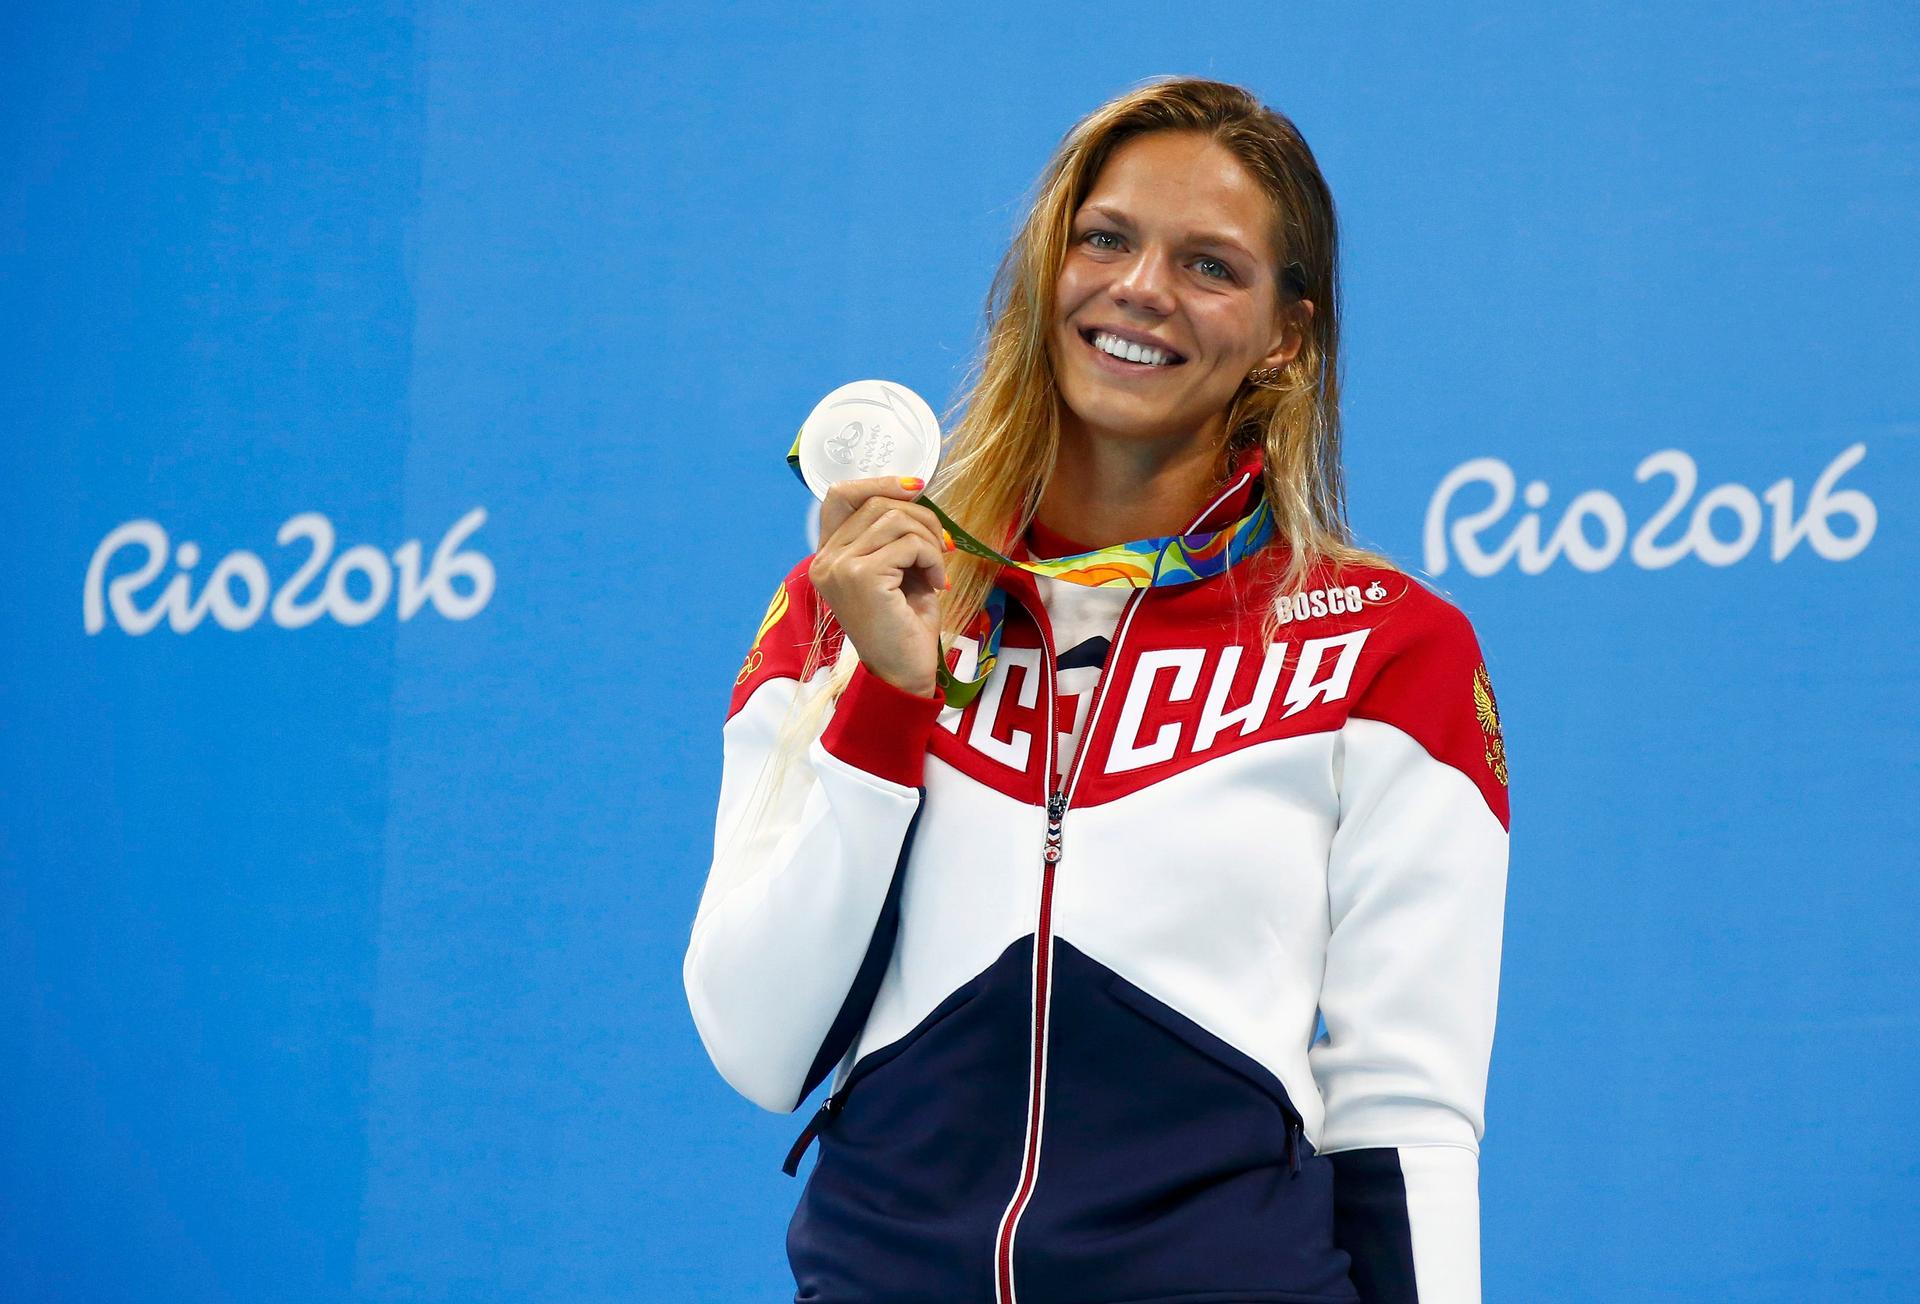 Yulia Efimova (RUS) of Russia poses with her silver medal at the Rio Olympics.